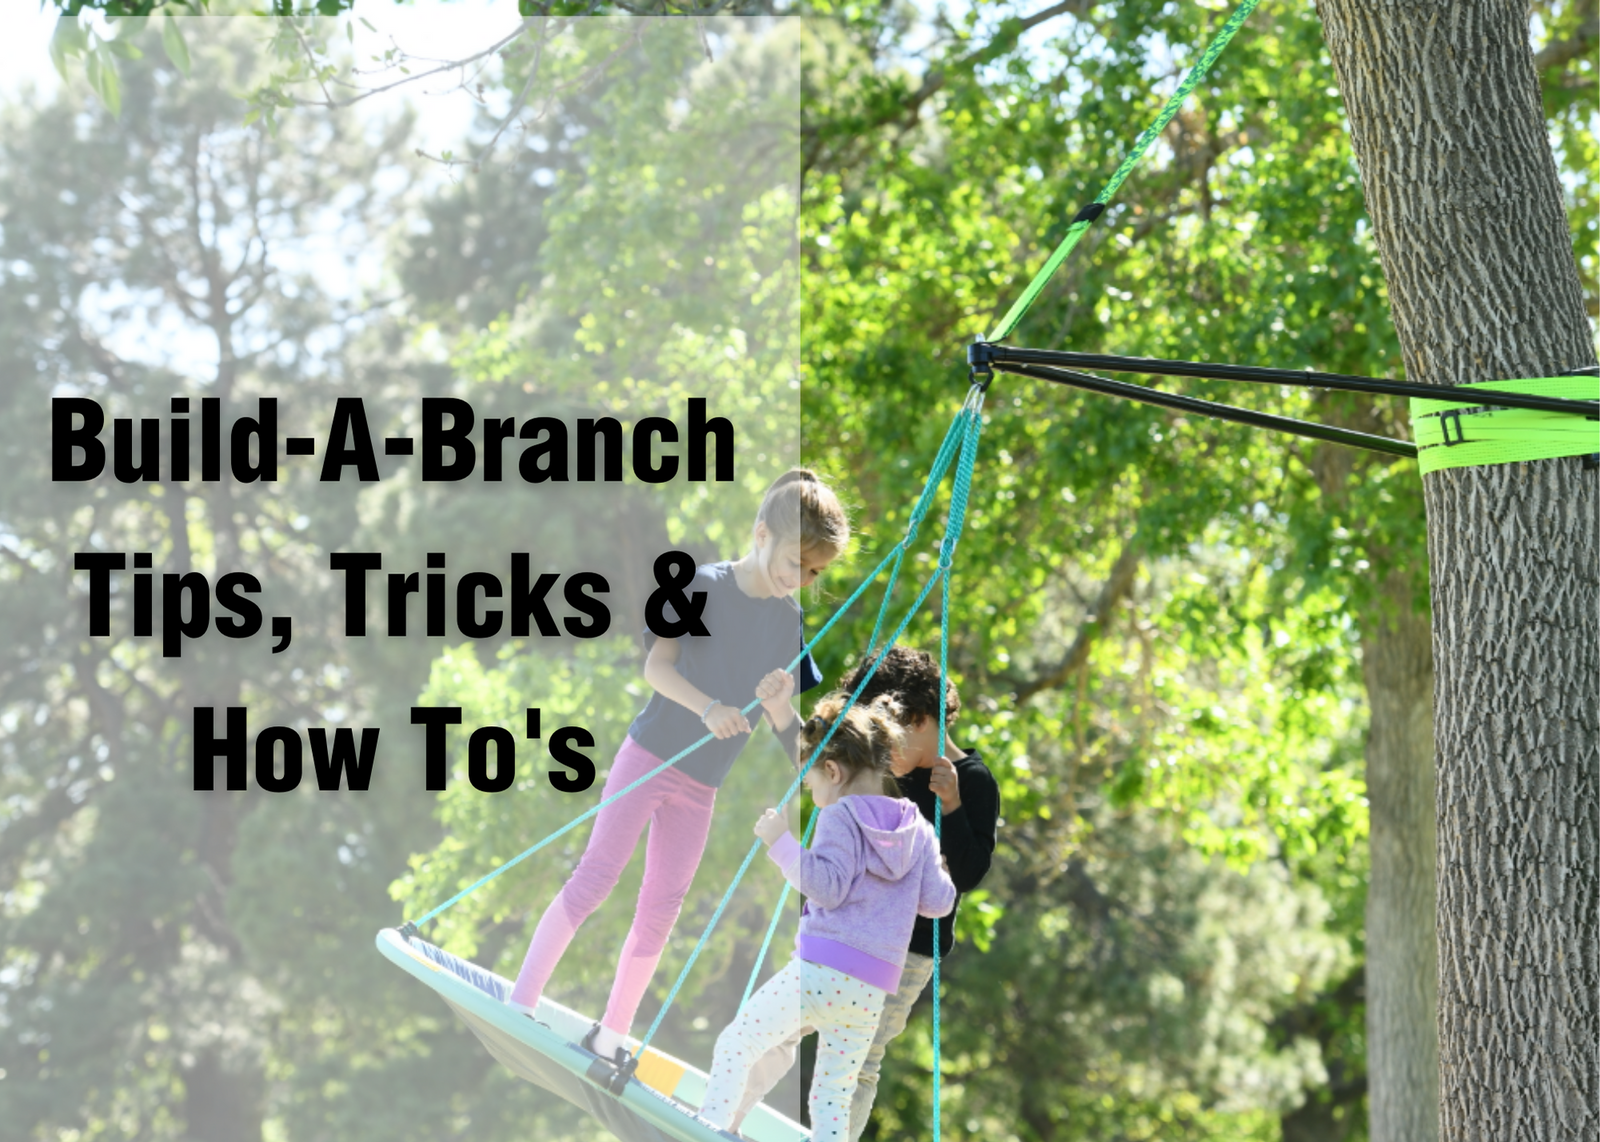 Build-A-Branch Tips, Tricks, and How To's